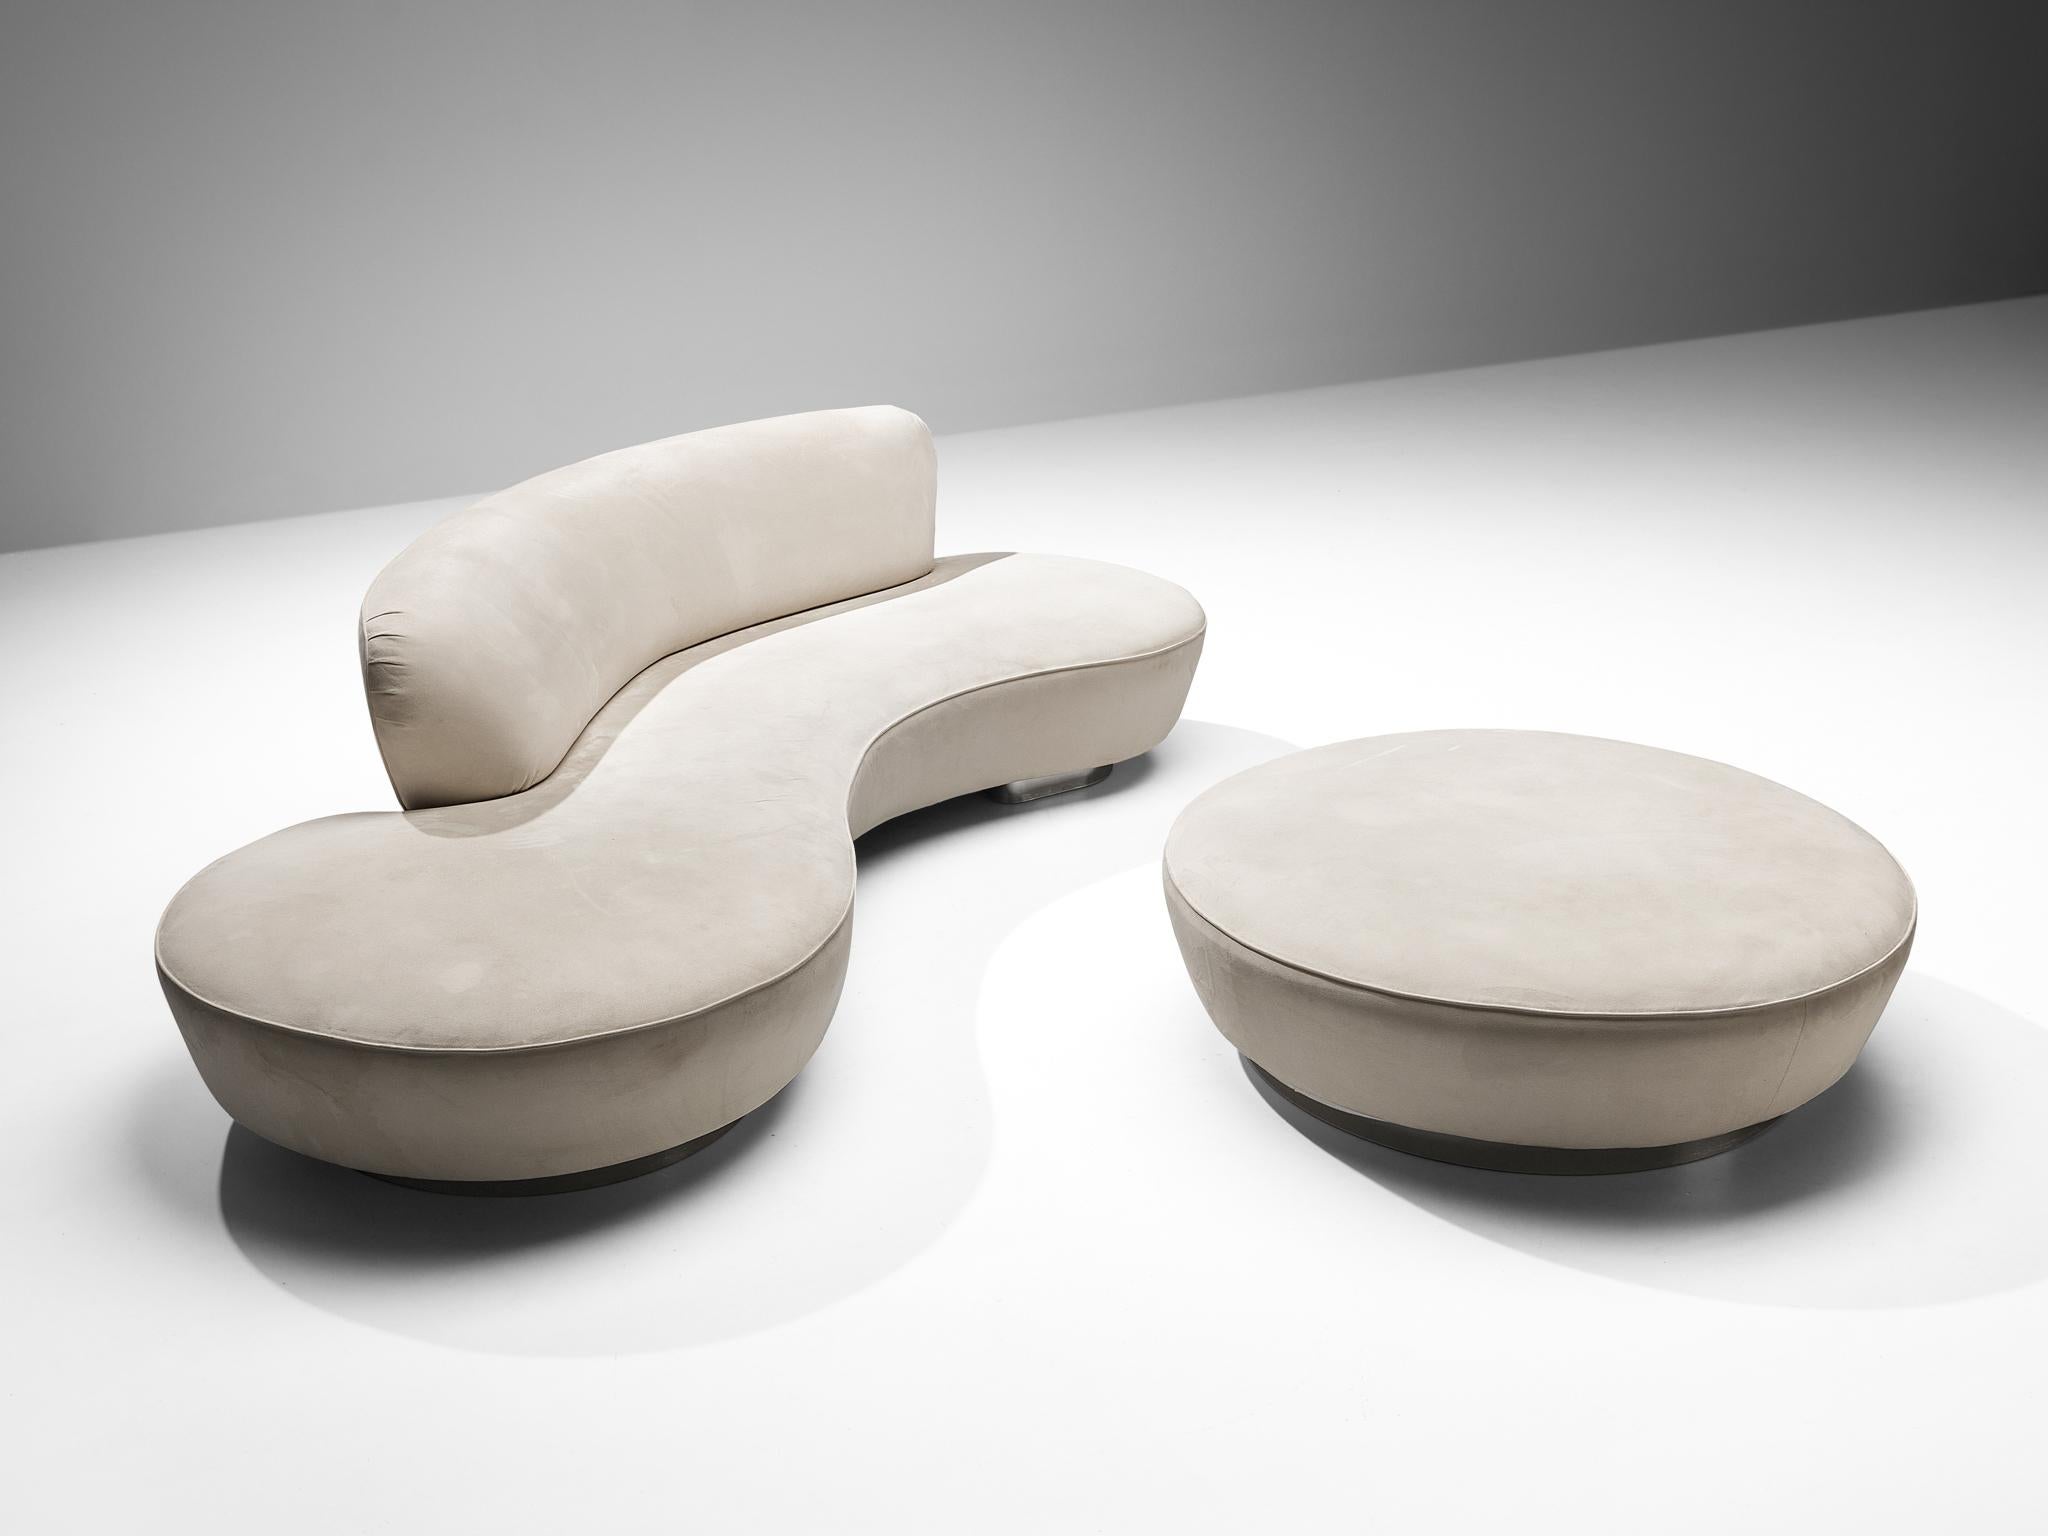 Iconic Vladimir Kagan ‘Serpentine’ Sofa and Ottoman in Off-White Upholstery 3